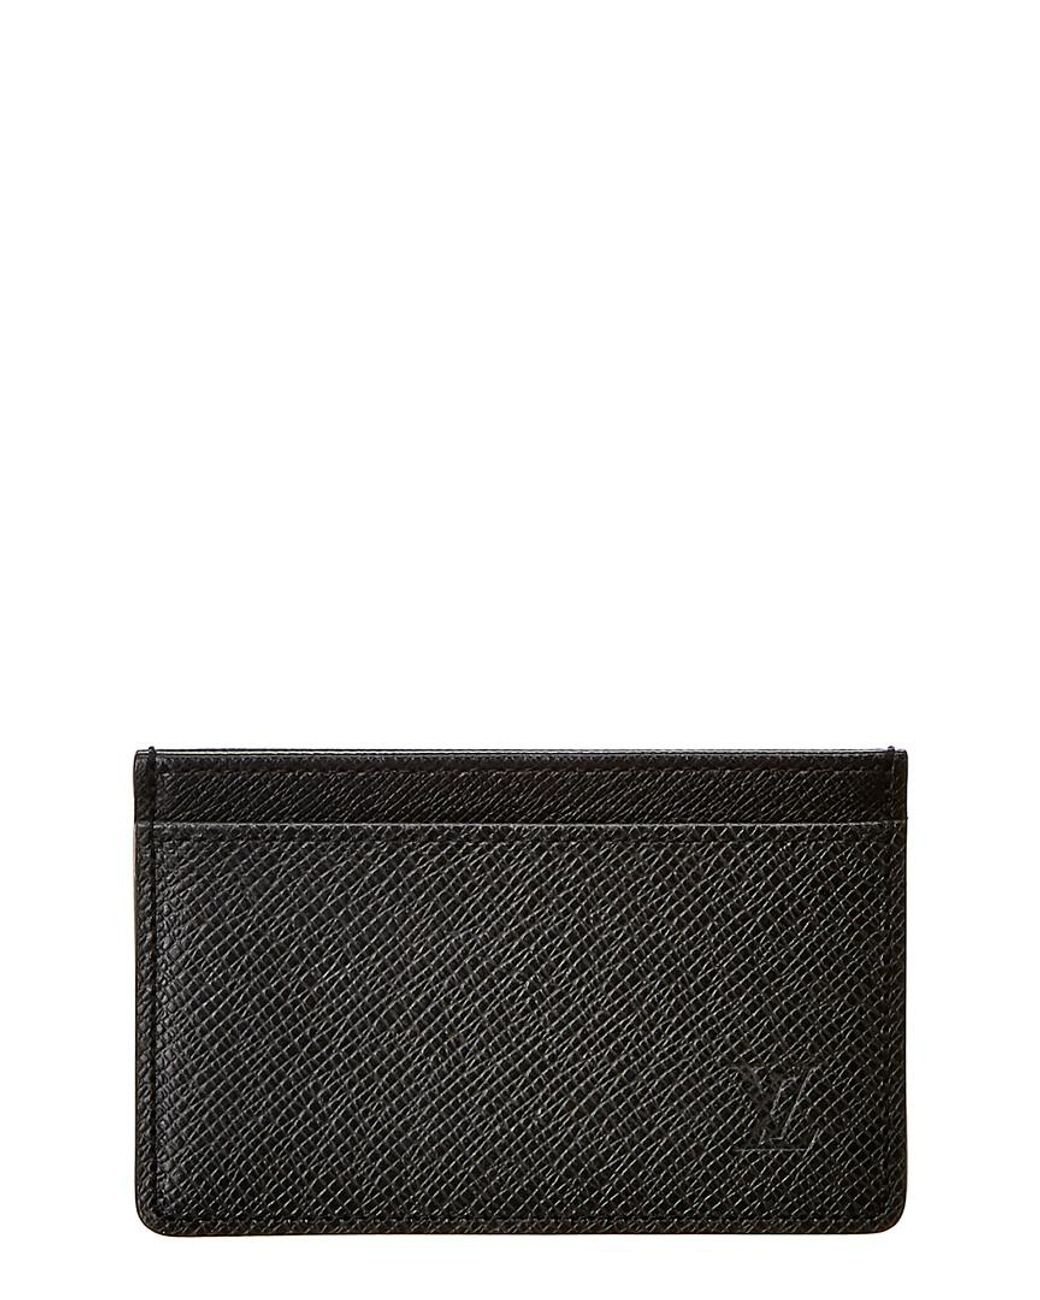 SOLD** NEW - LV Taiga Leather Standing Pouch Black (NFC), Luxury